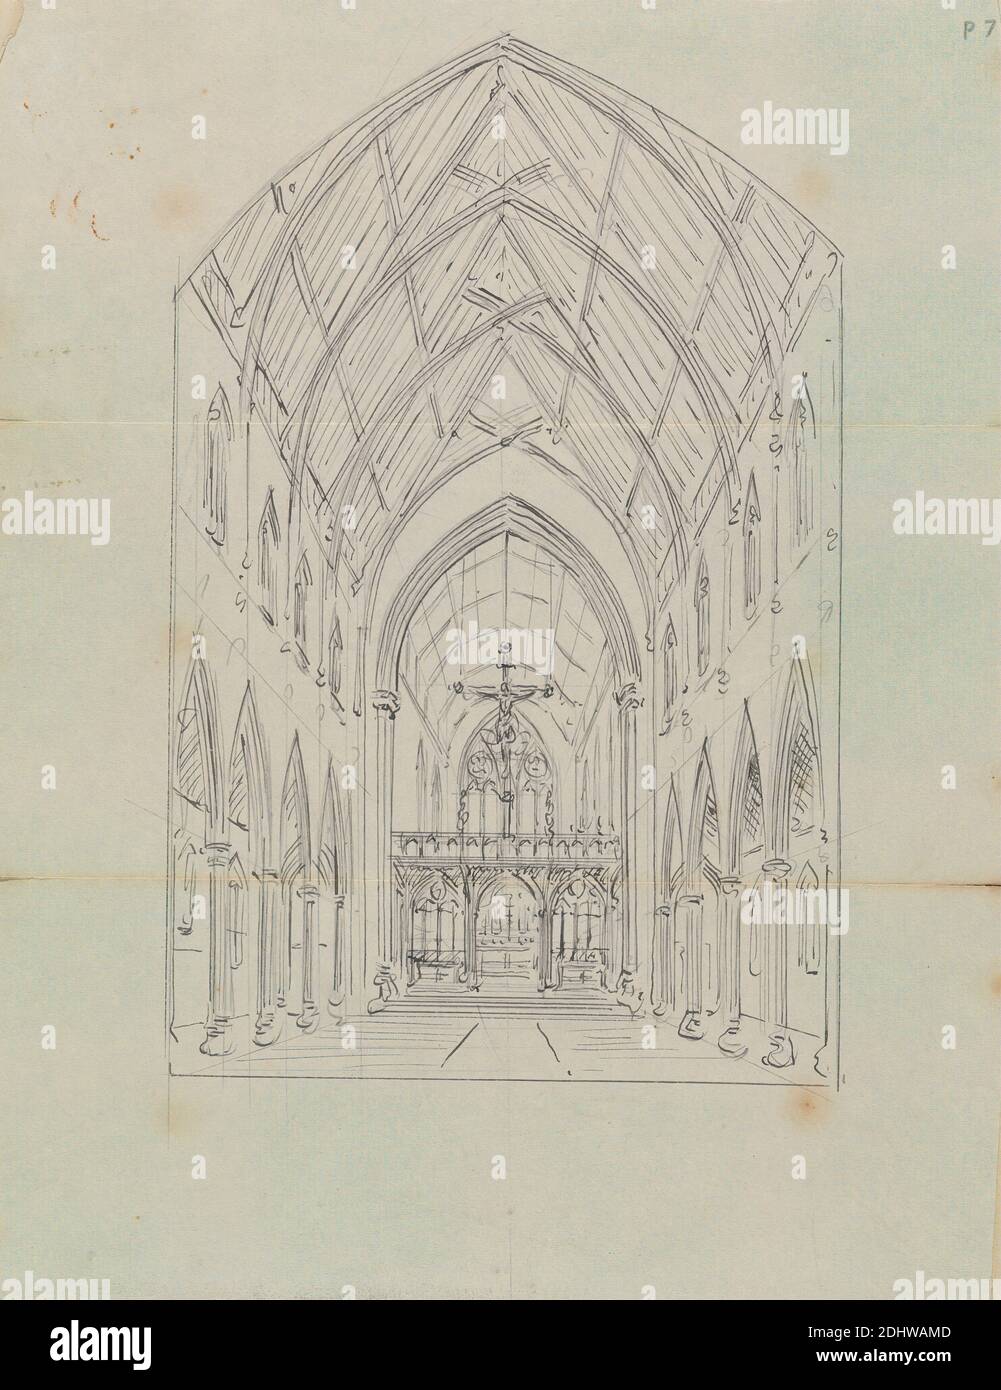 Sketch of the Interior of a Gothic Church, Augustus Welby Northmore Pugin, 1812–1852, British, Augustus Charles Pugin, 1762–1832, French, undated, Pen and gray ink and graphite on thin, smooth, cream wove paper, Sheet: 9 3/4 x 7 3/4 inches (24.8 x 19.7 cm), altar, architectural subject, church, cross (object), Gothic (Medieval), interior Stock Photo